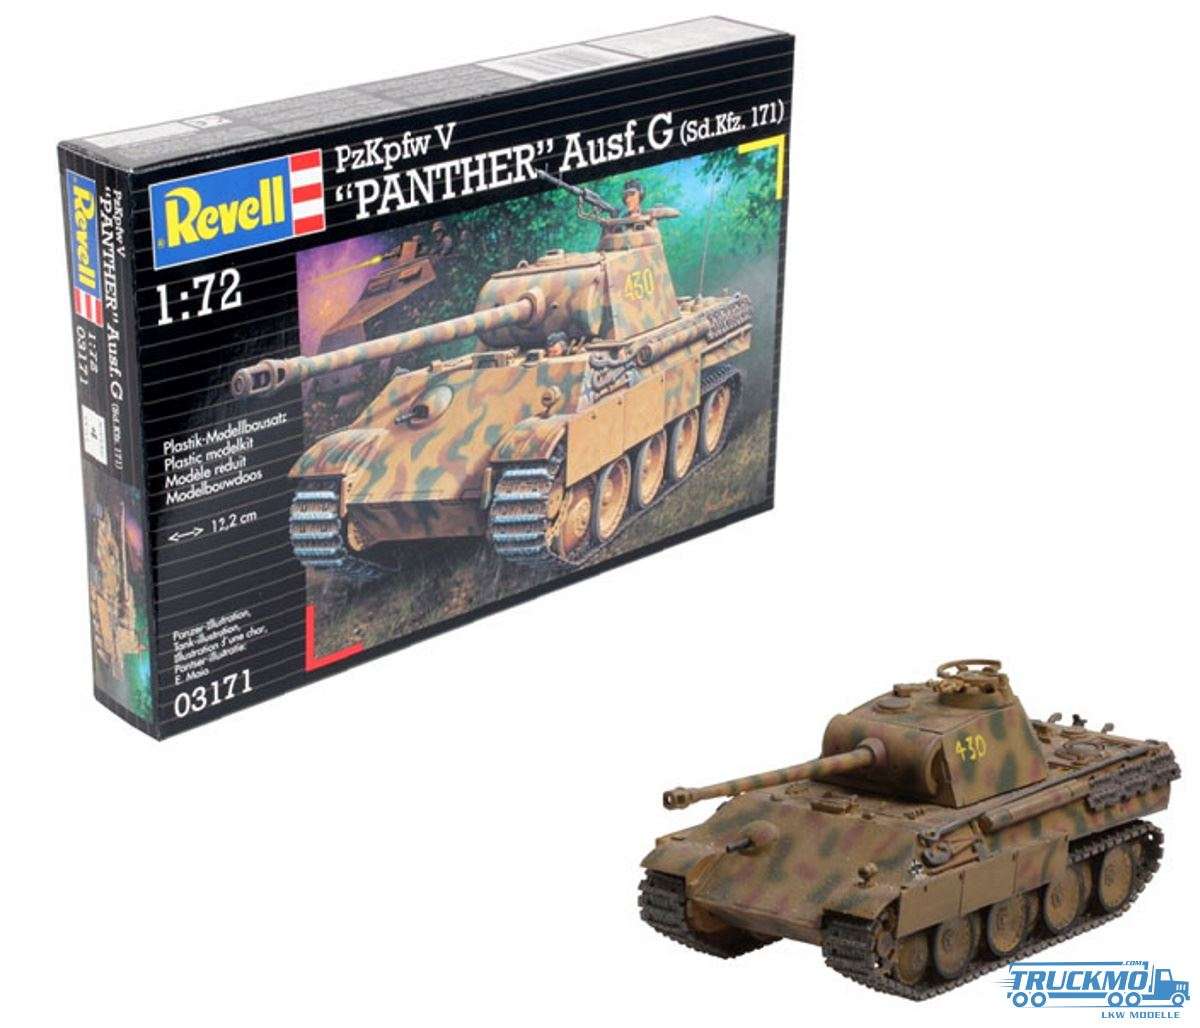 Revell military PzKpfw V Panther Ausf. G 1:72 03171